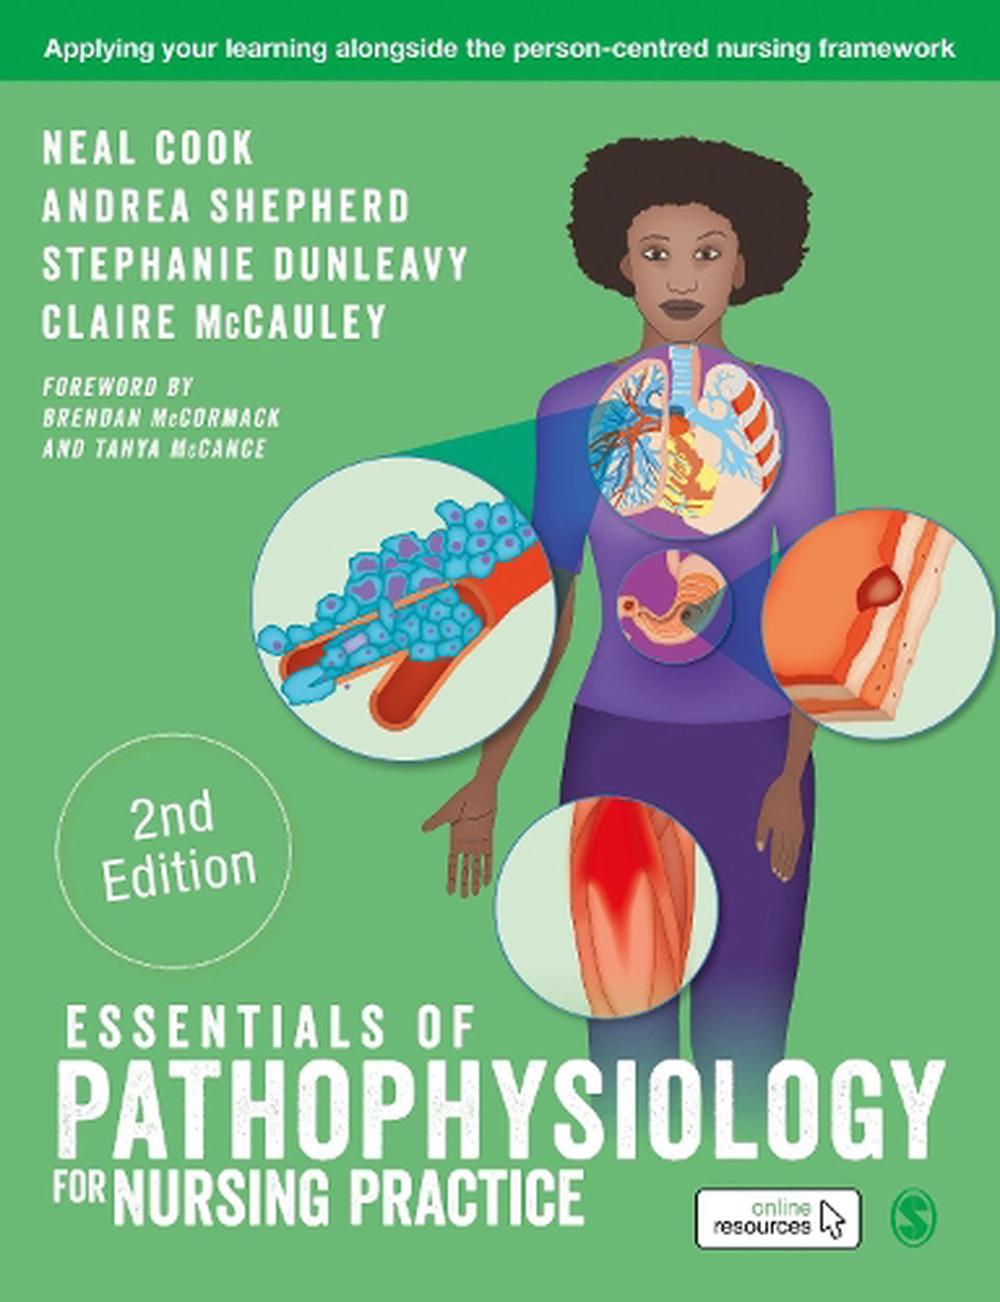 by　Neal　Essentials　for　9781529775952　Buy　online　Practice　The　of　Pathophysiology　Cook,　at　Nursing　Paperback,　Nile